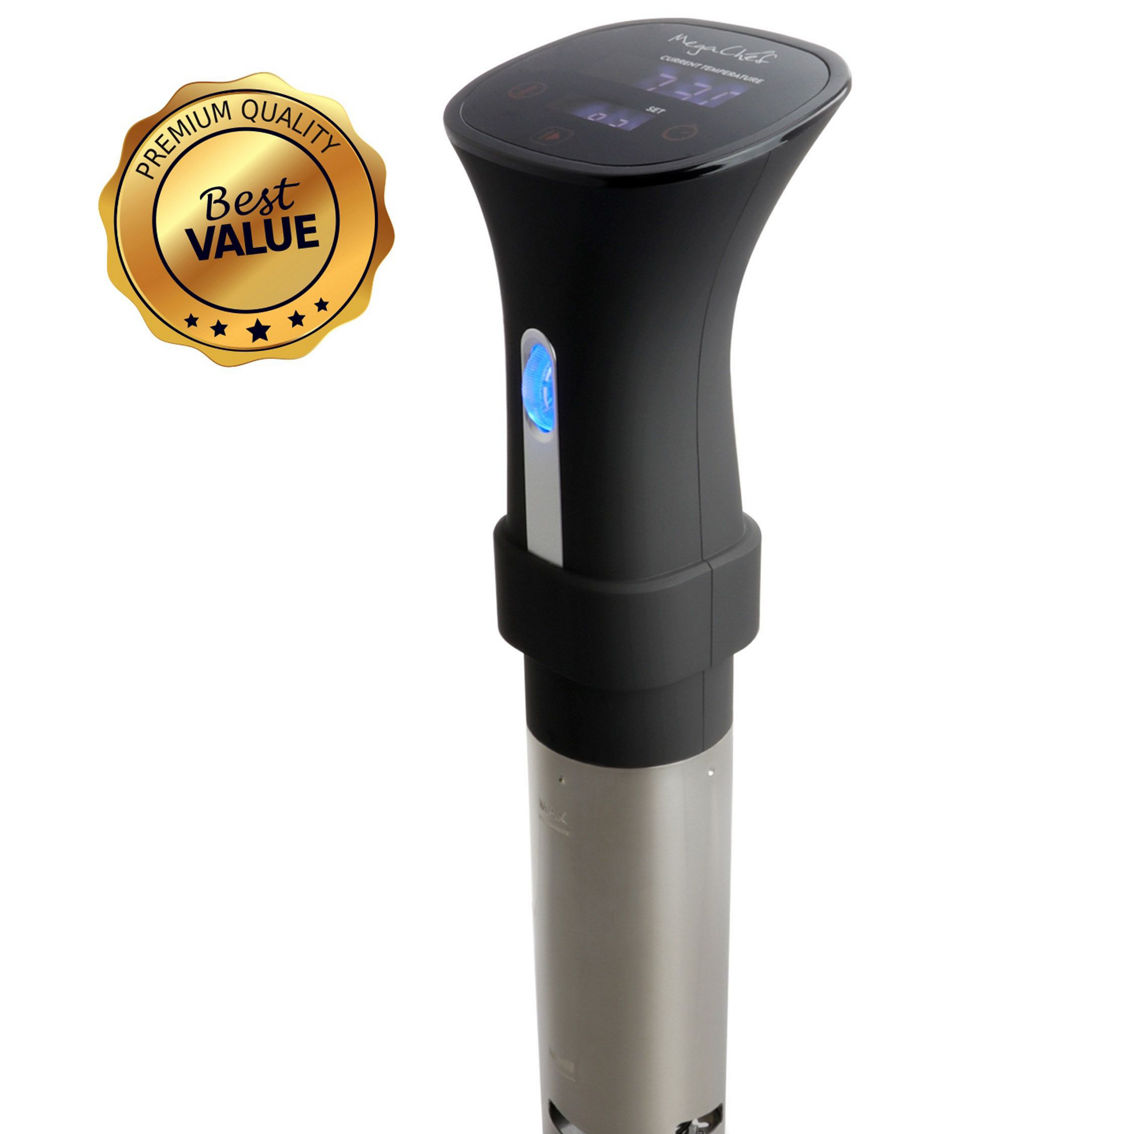 MegaChef Immersion Circulation Precision Sous-Vide Cooker With Digital Touchscre - Image 2 of 5